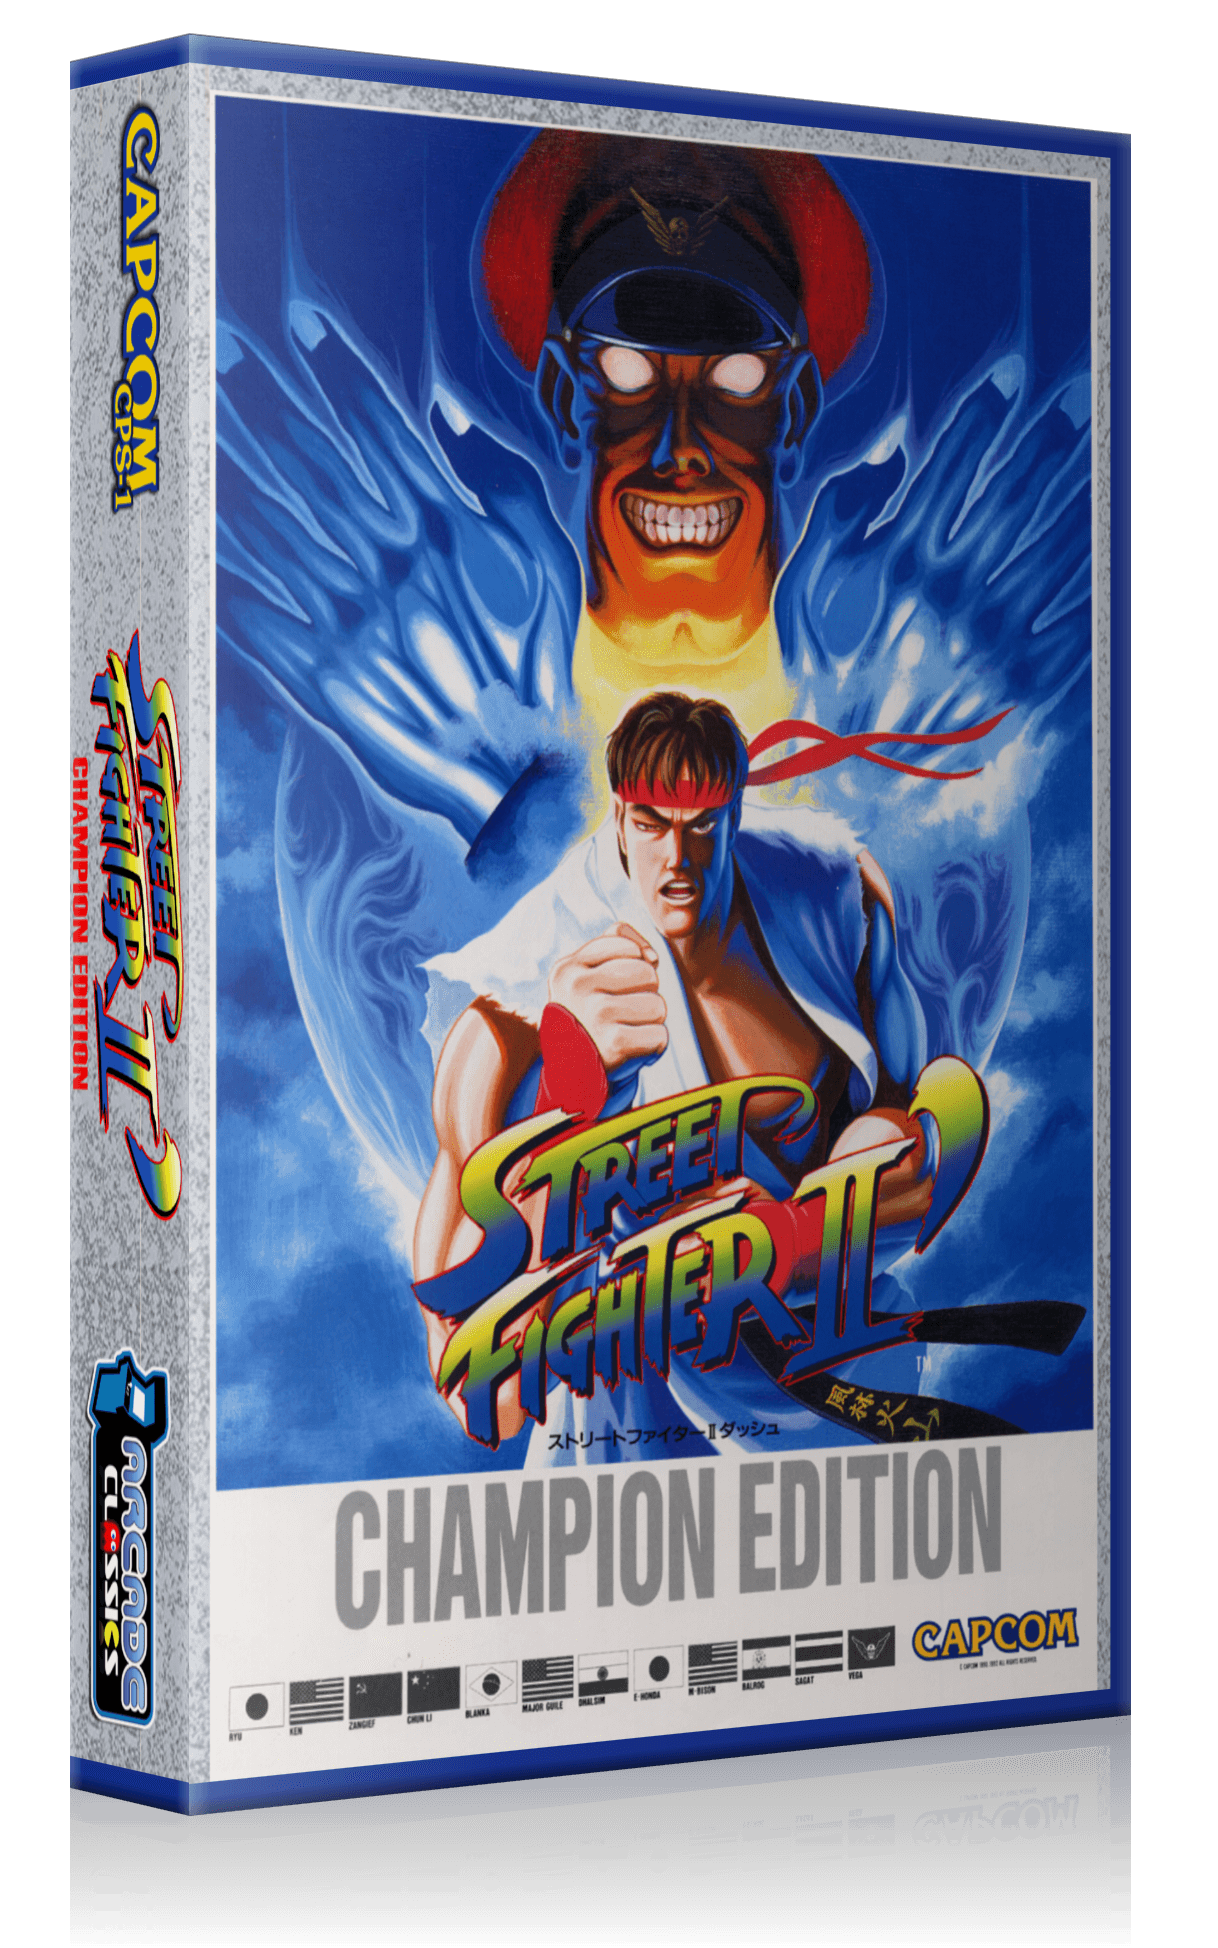 Street Fighter II': Champion Edition Details - LaunchBox Games Database